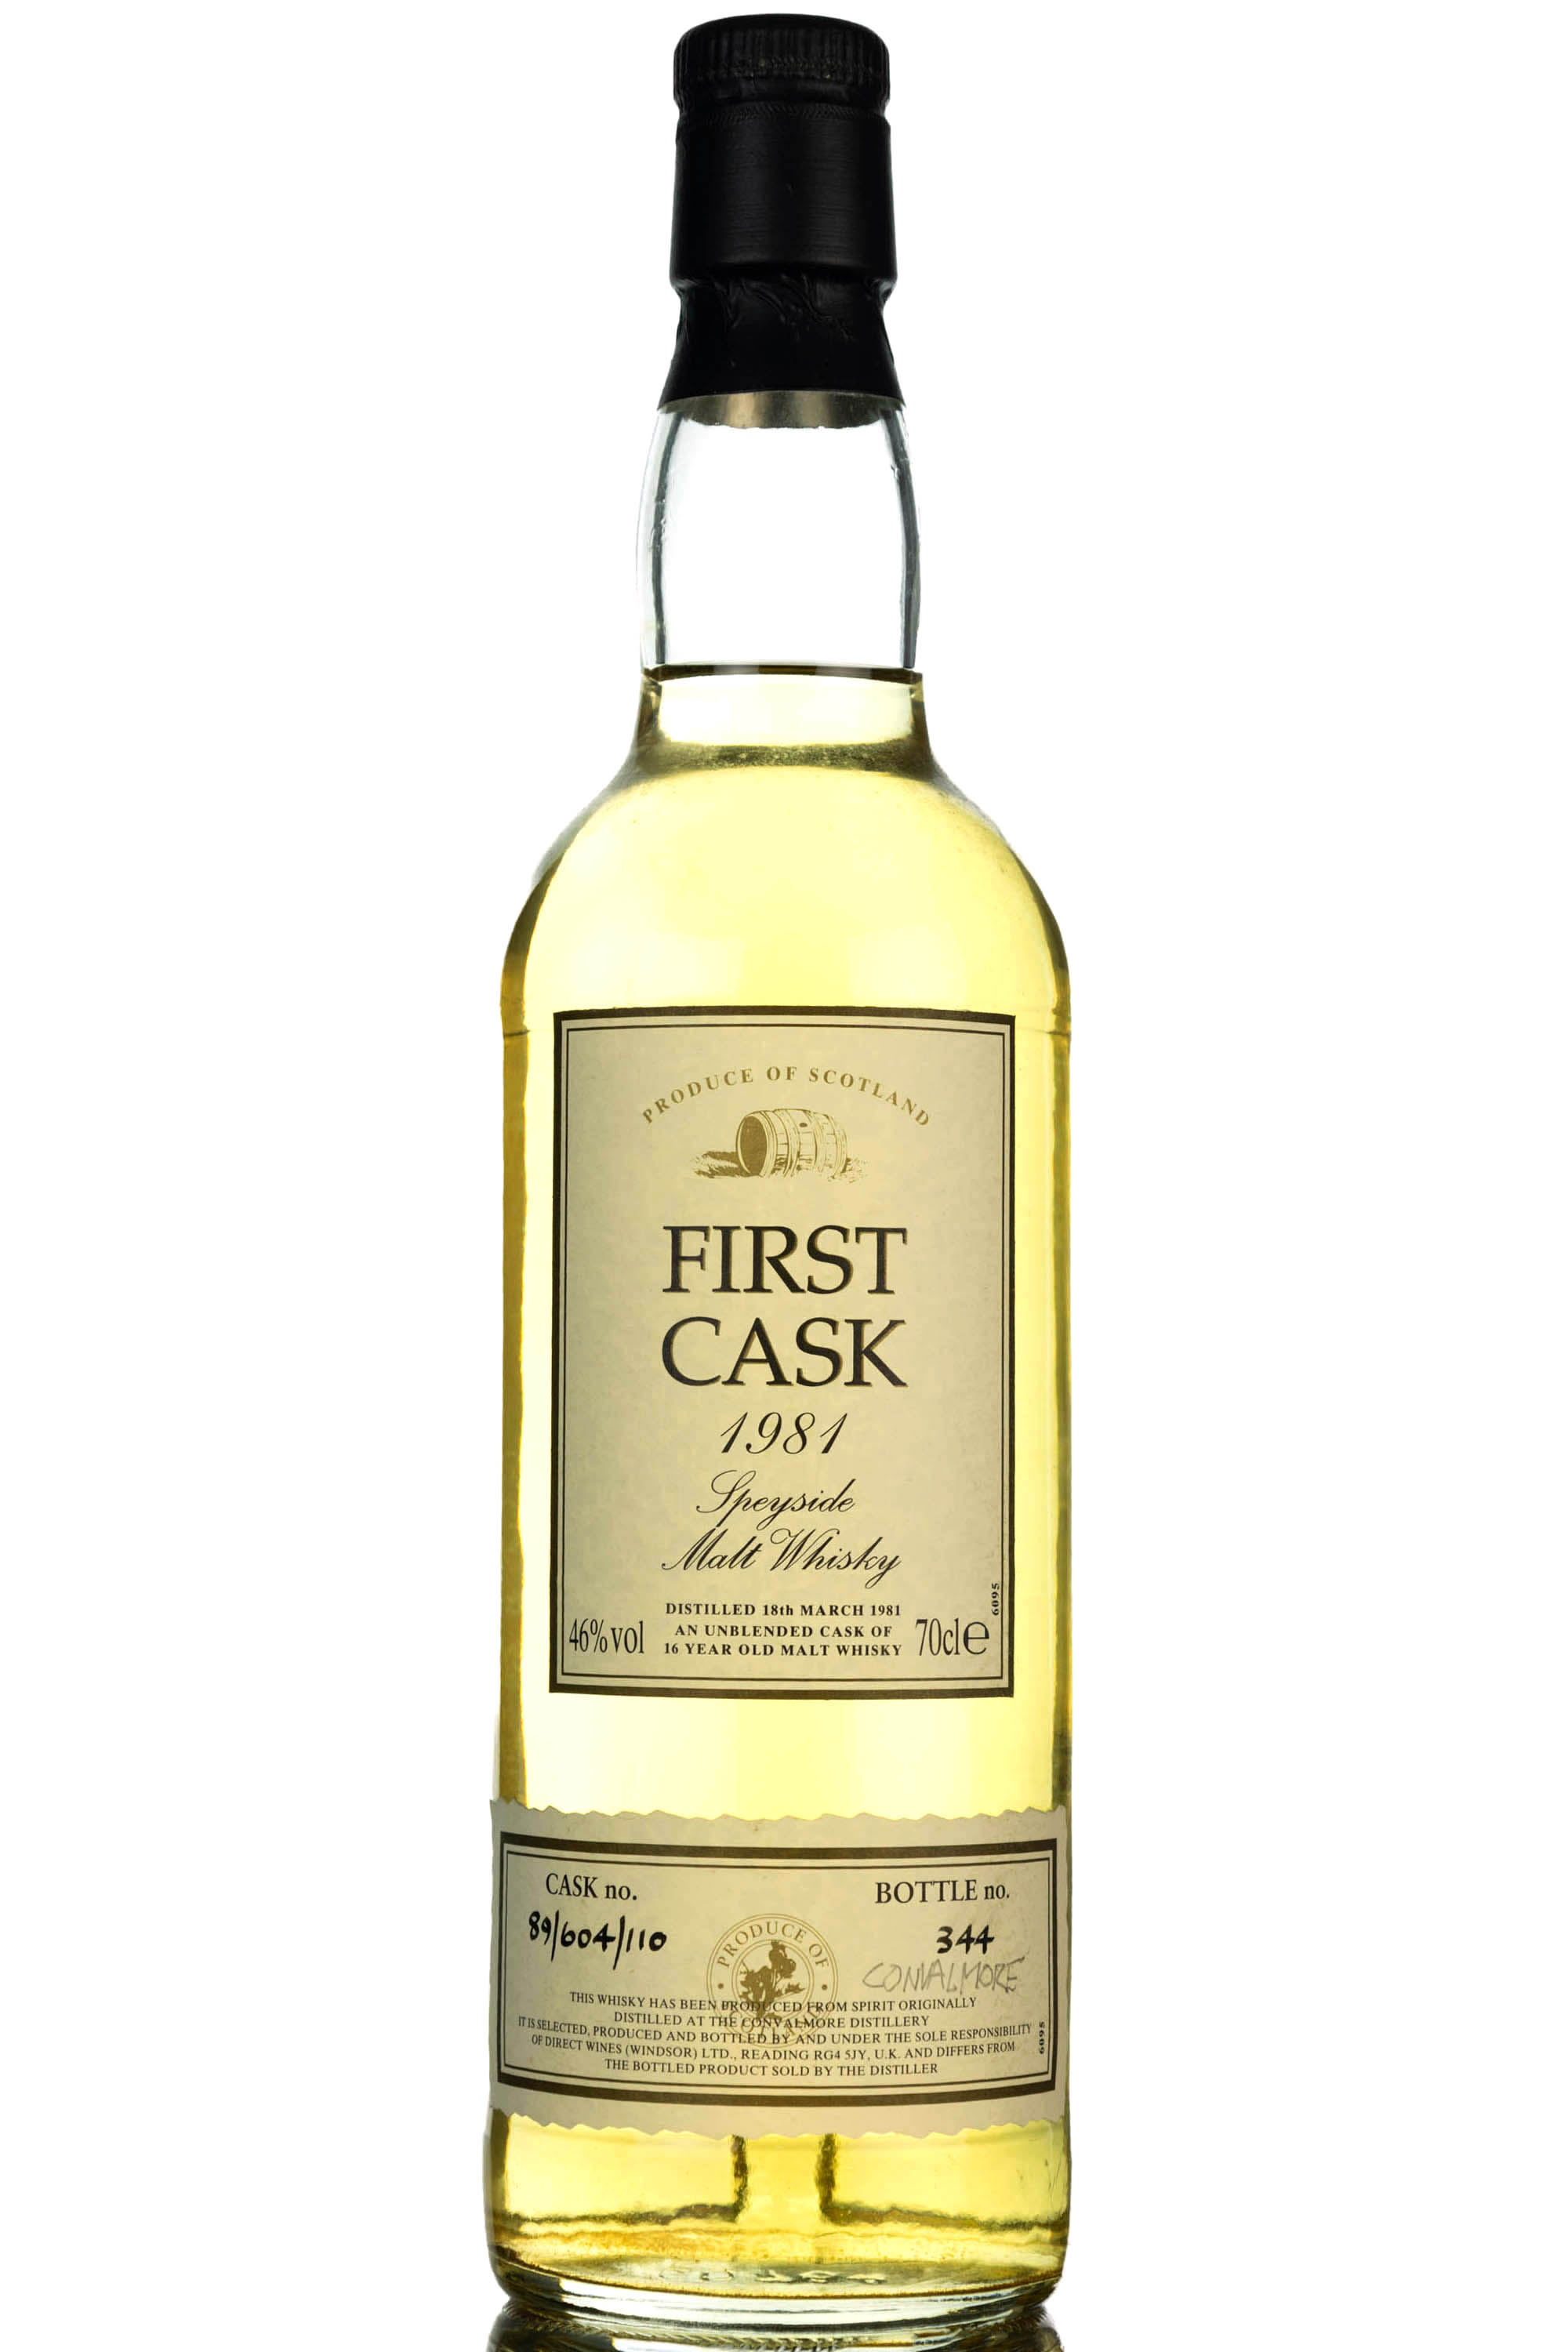 Convalmore 1981 - 16 Year Old - First Cask - Single Cask 89/604/110